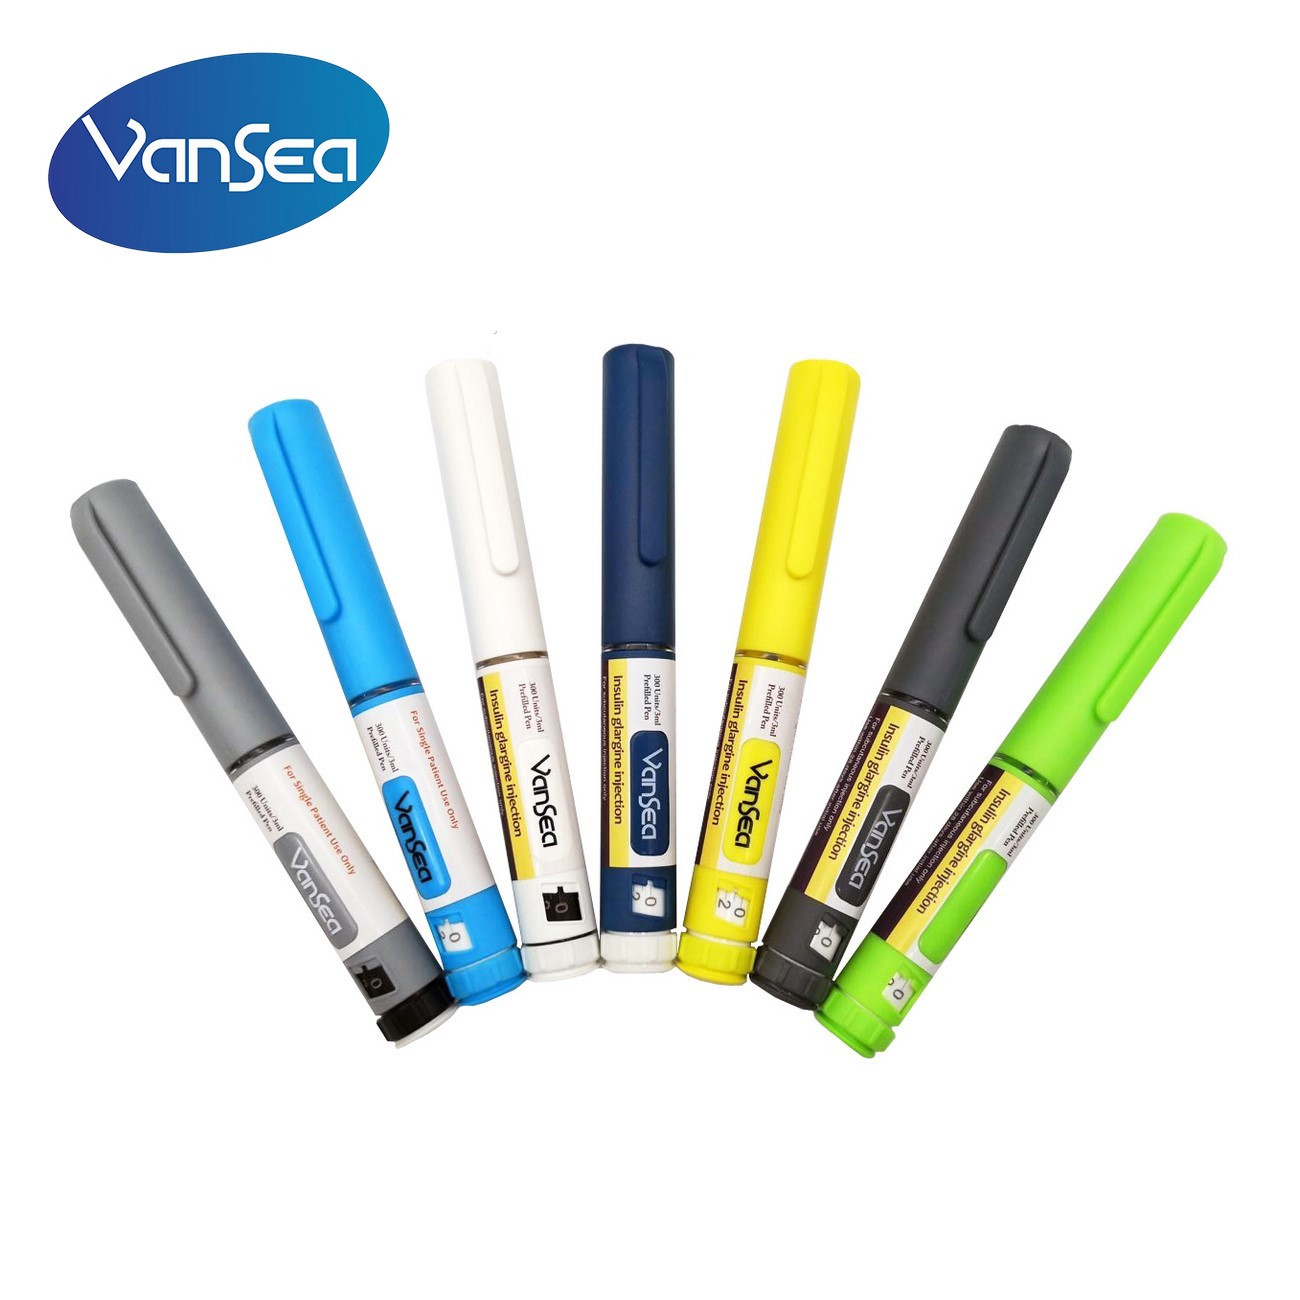 isposable injection pen injector for 3ML cartridge